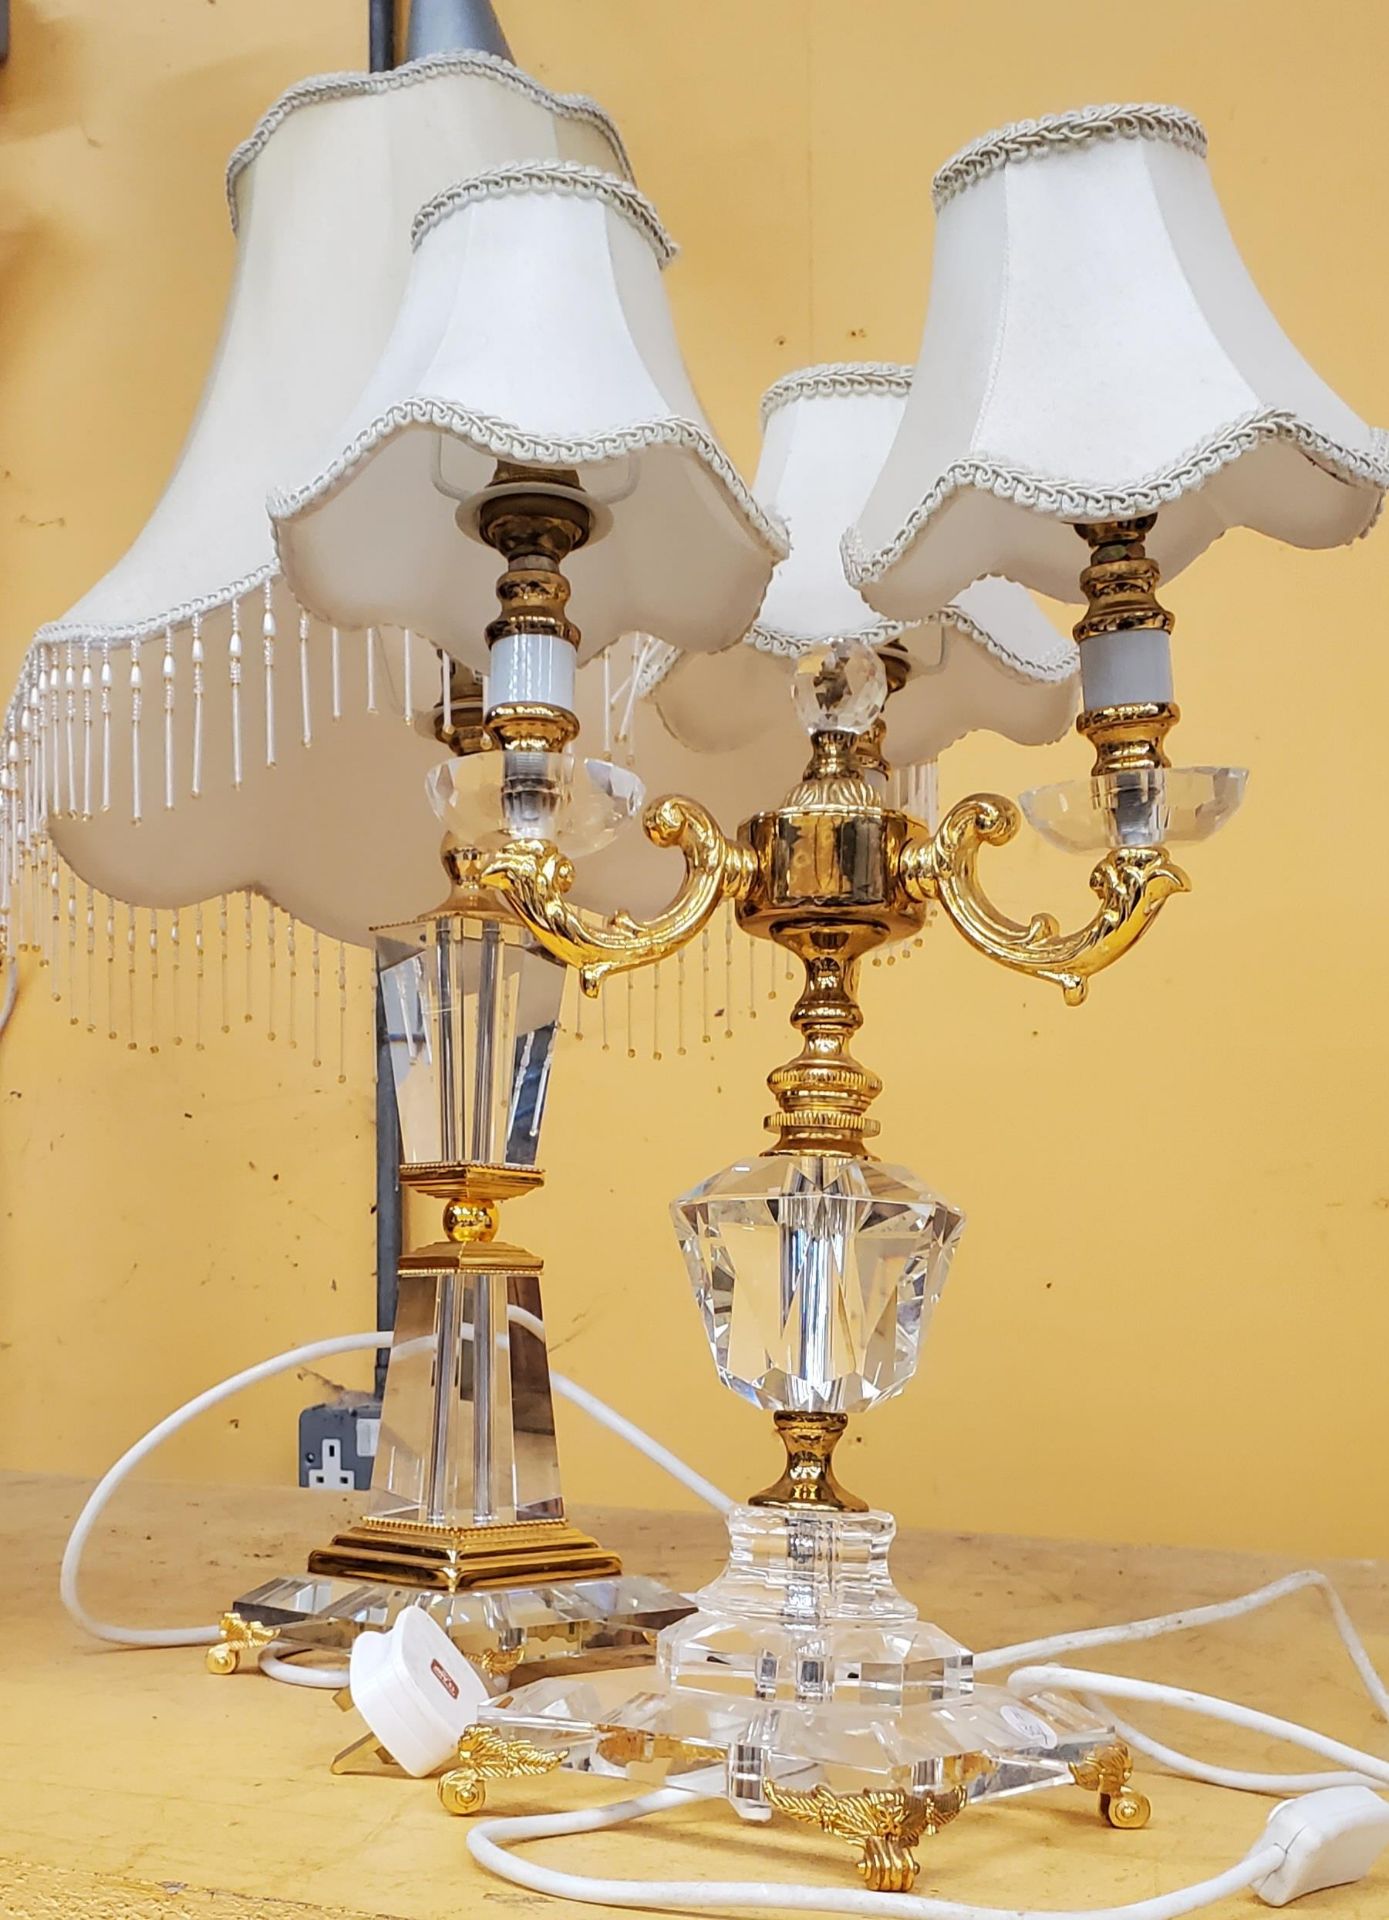 TWO LART GILT AND GLASS TABLE LAMPS, ONE WITH THREE BRANCHES, BOTH WITH SHADES, HEIGHT 35CM AND 39CM